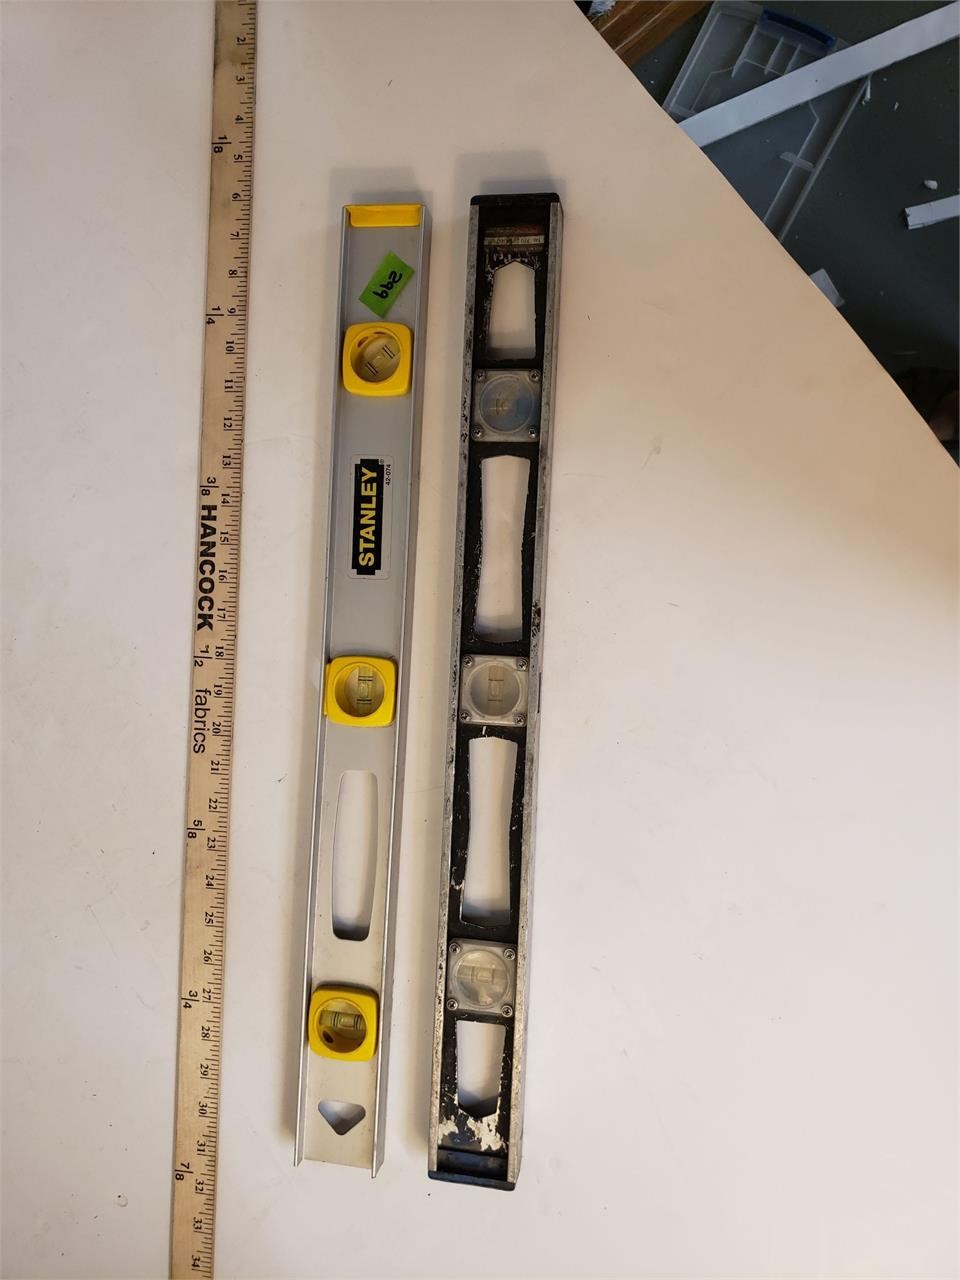 Stanley Level and Other Level, 24"